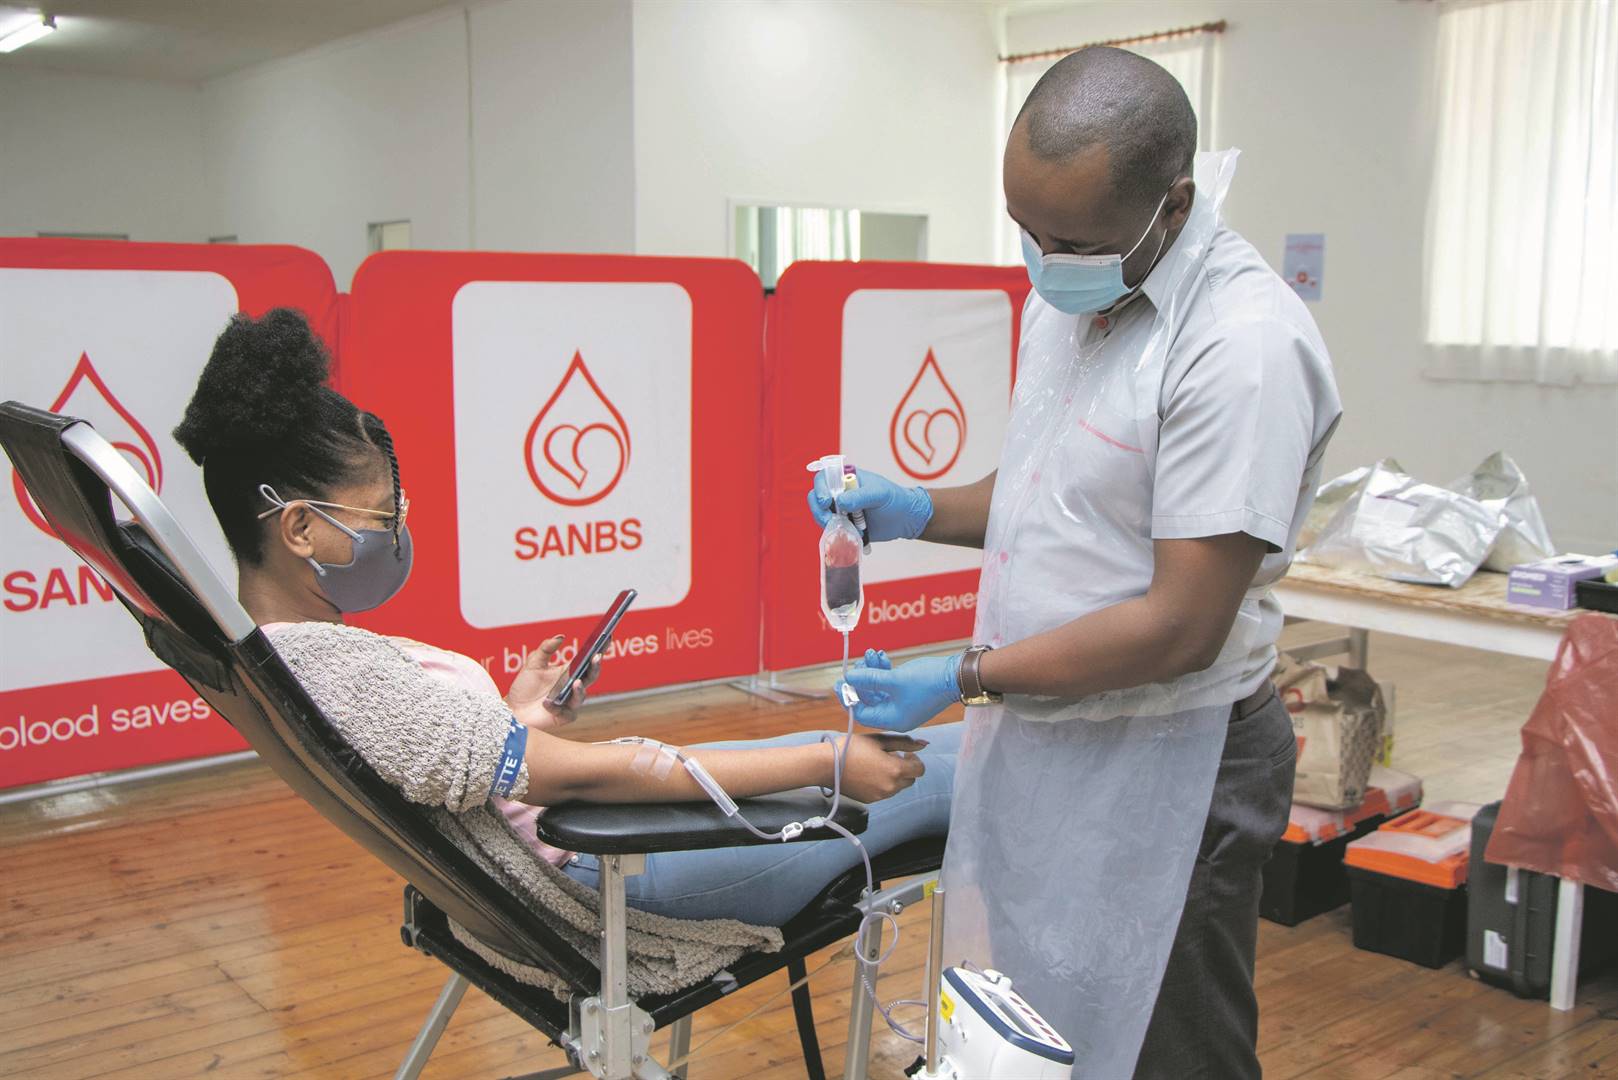 The SANBS has a blood shortage and needs people to donate.